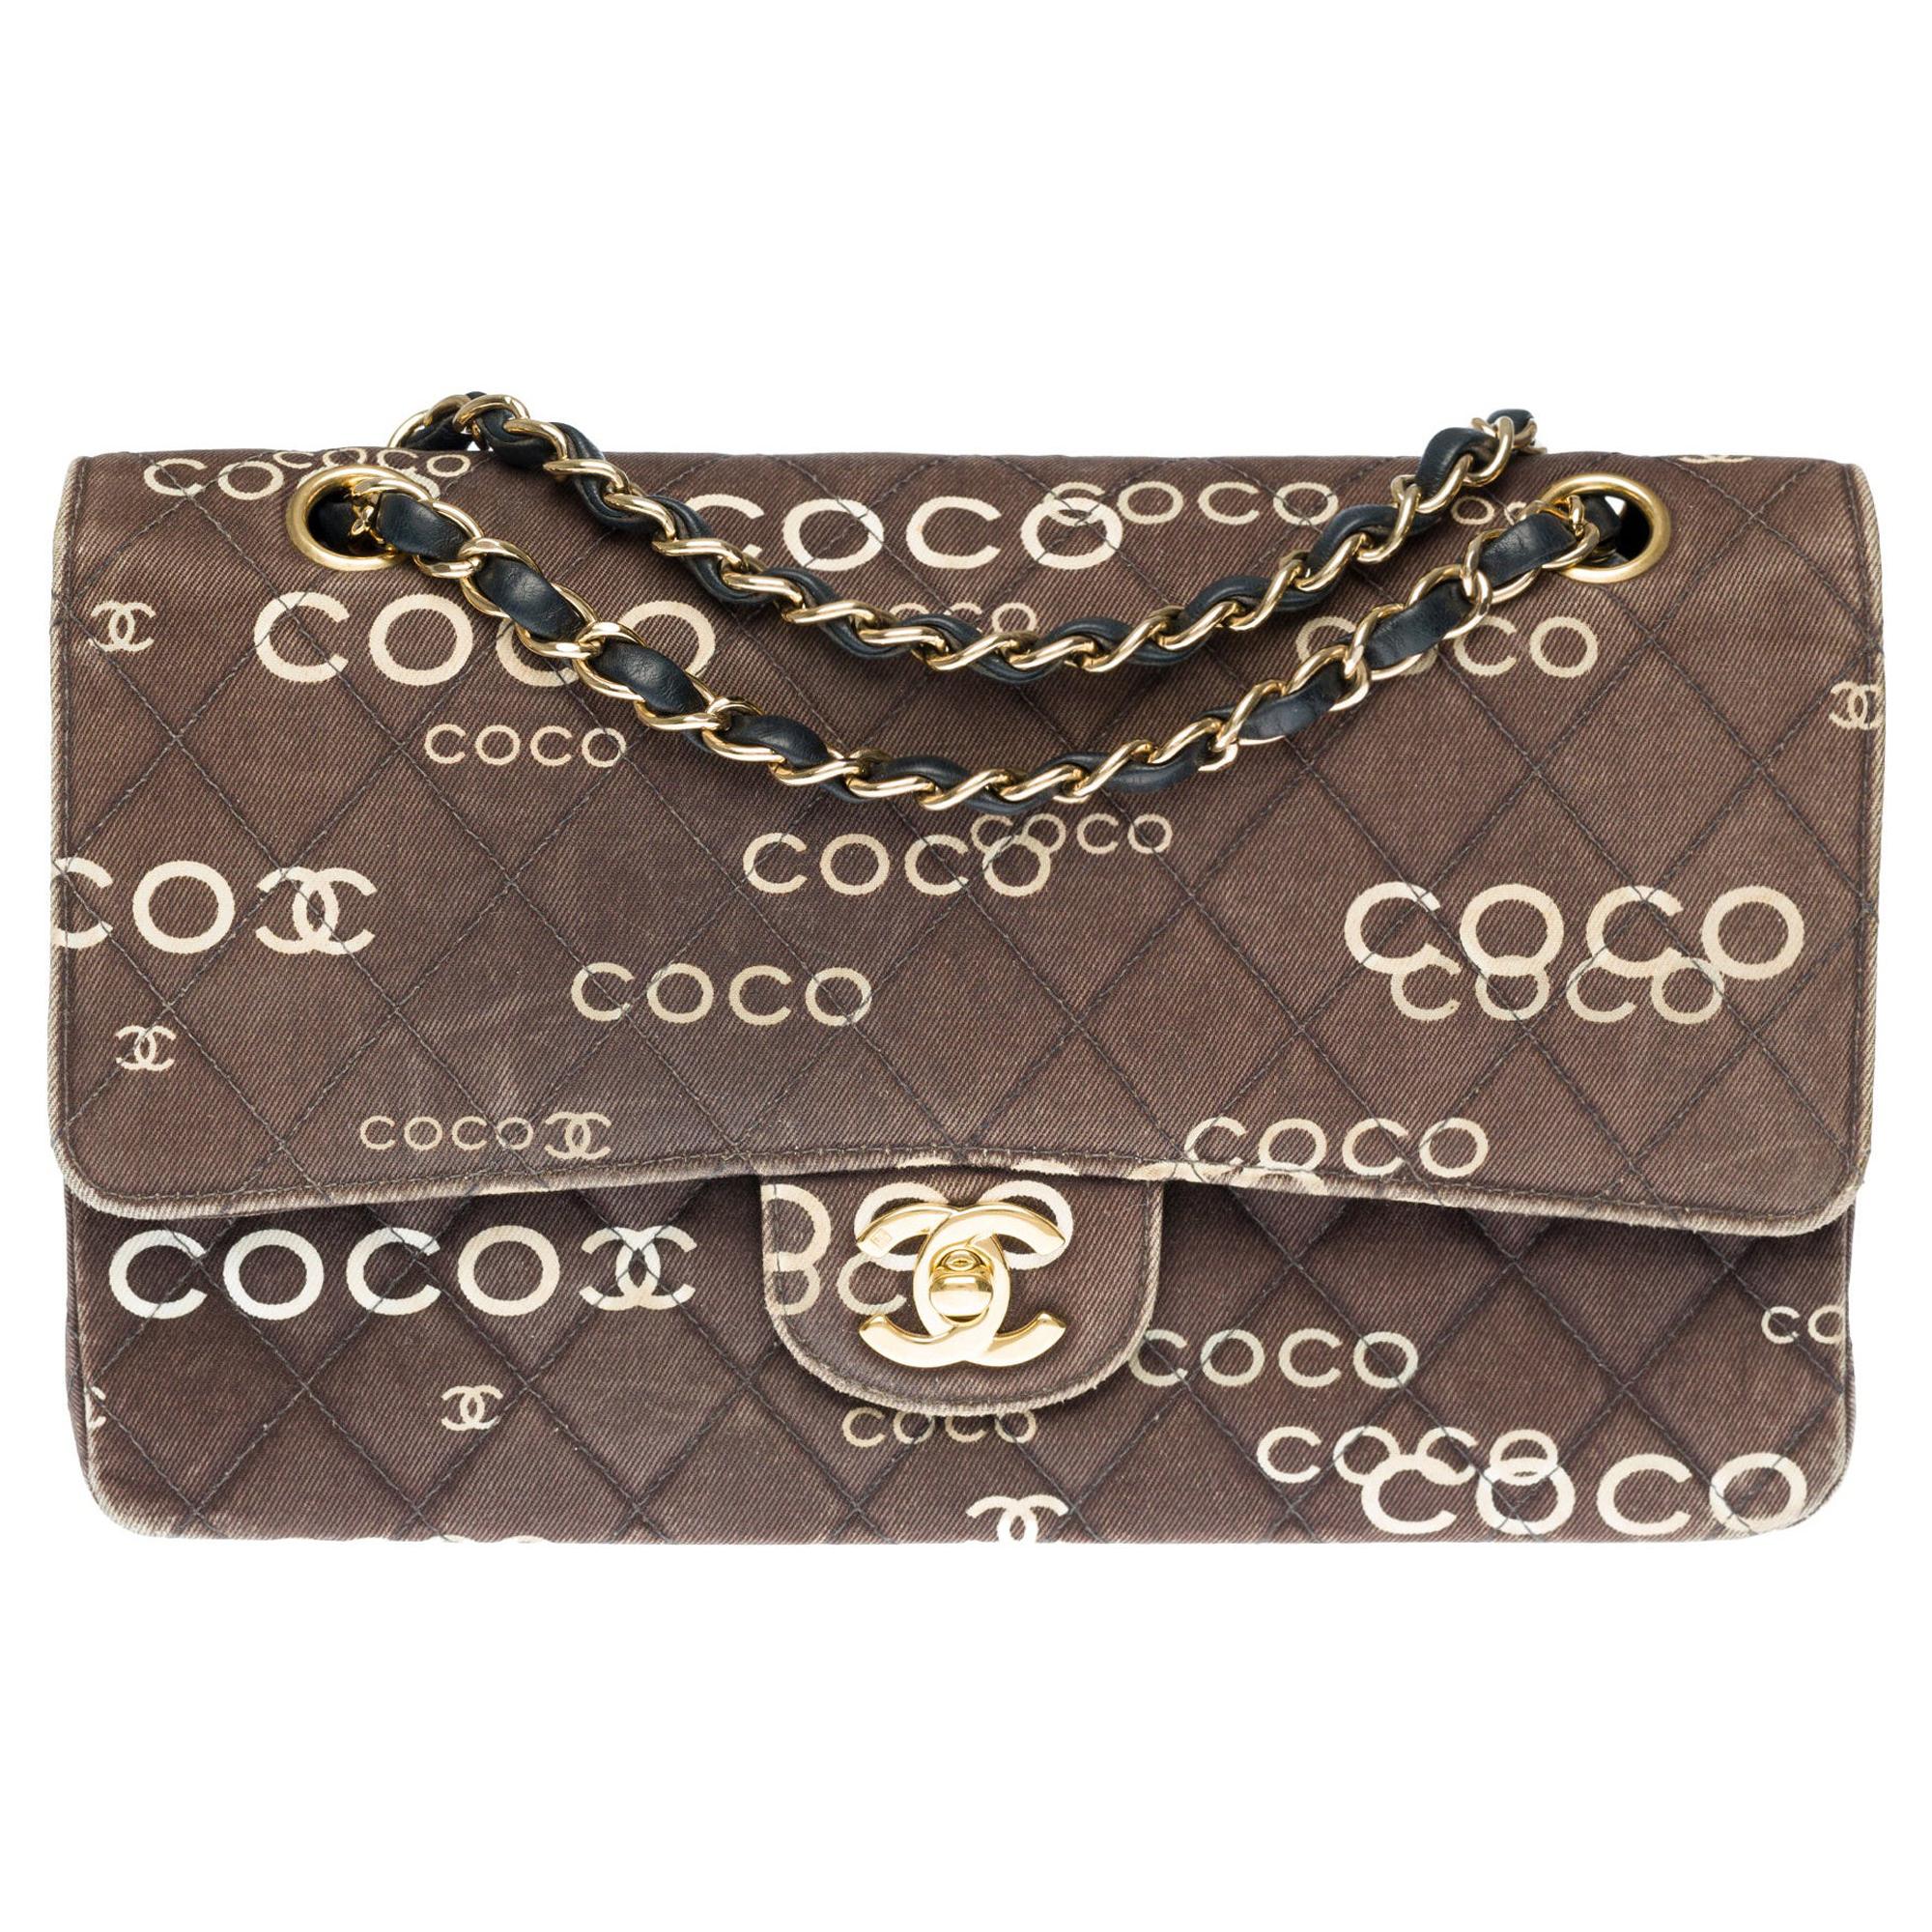 Rare Chanel 2.55 "Coco Chanel" shoulder bag in brown printed quilted canvas, GHW